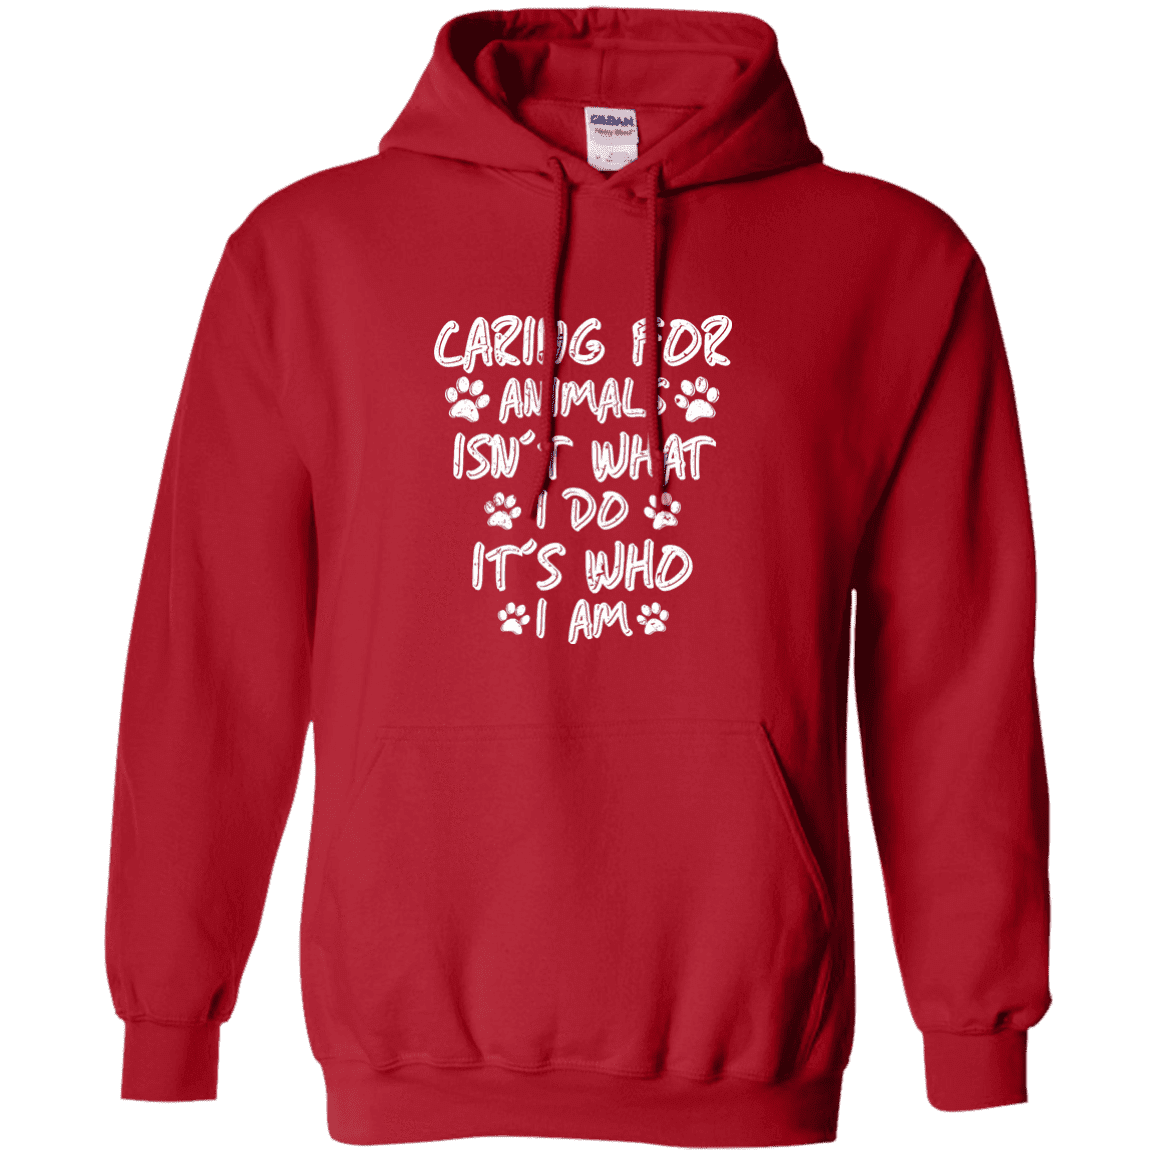 Caring For Animals - Hoodie.